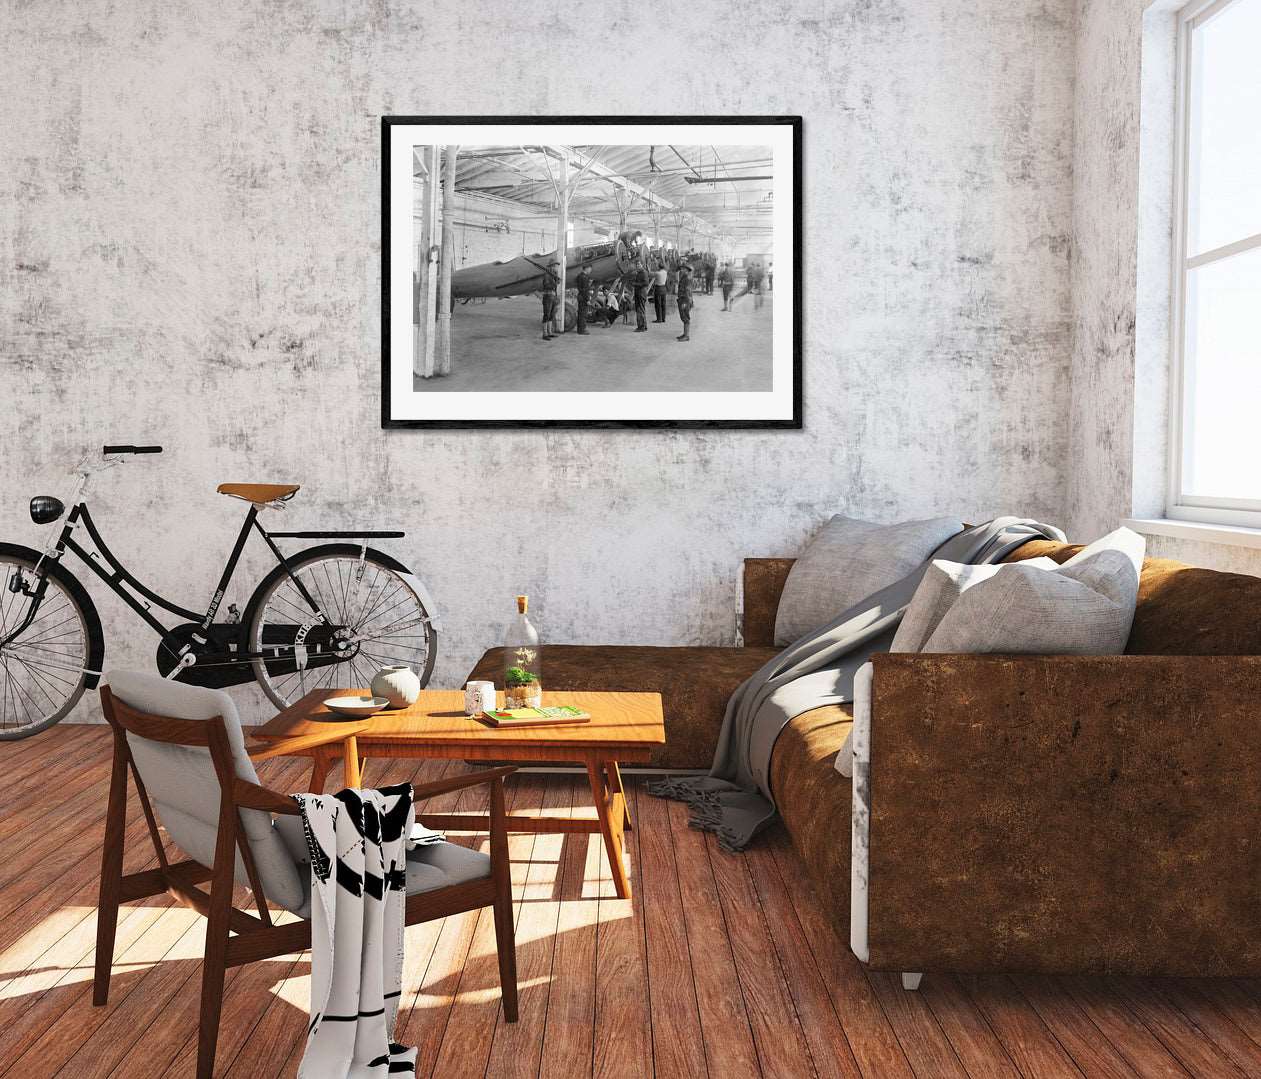 A digitally rendered living room with a framed paper print of a vintage photograph of a plane shop hanging on the wall